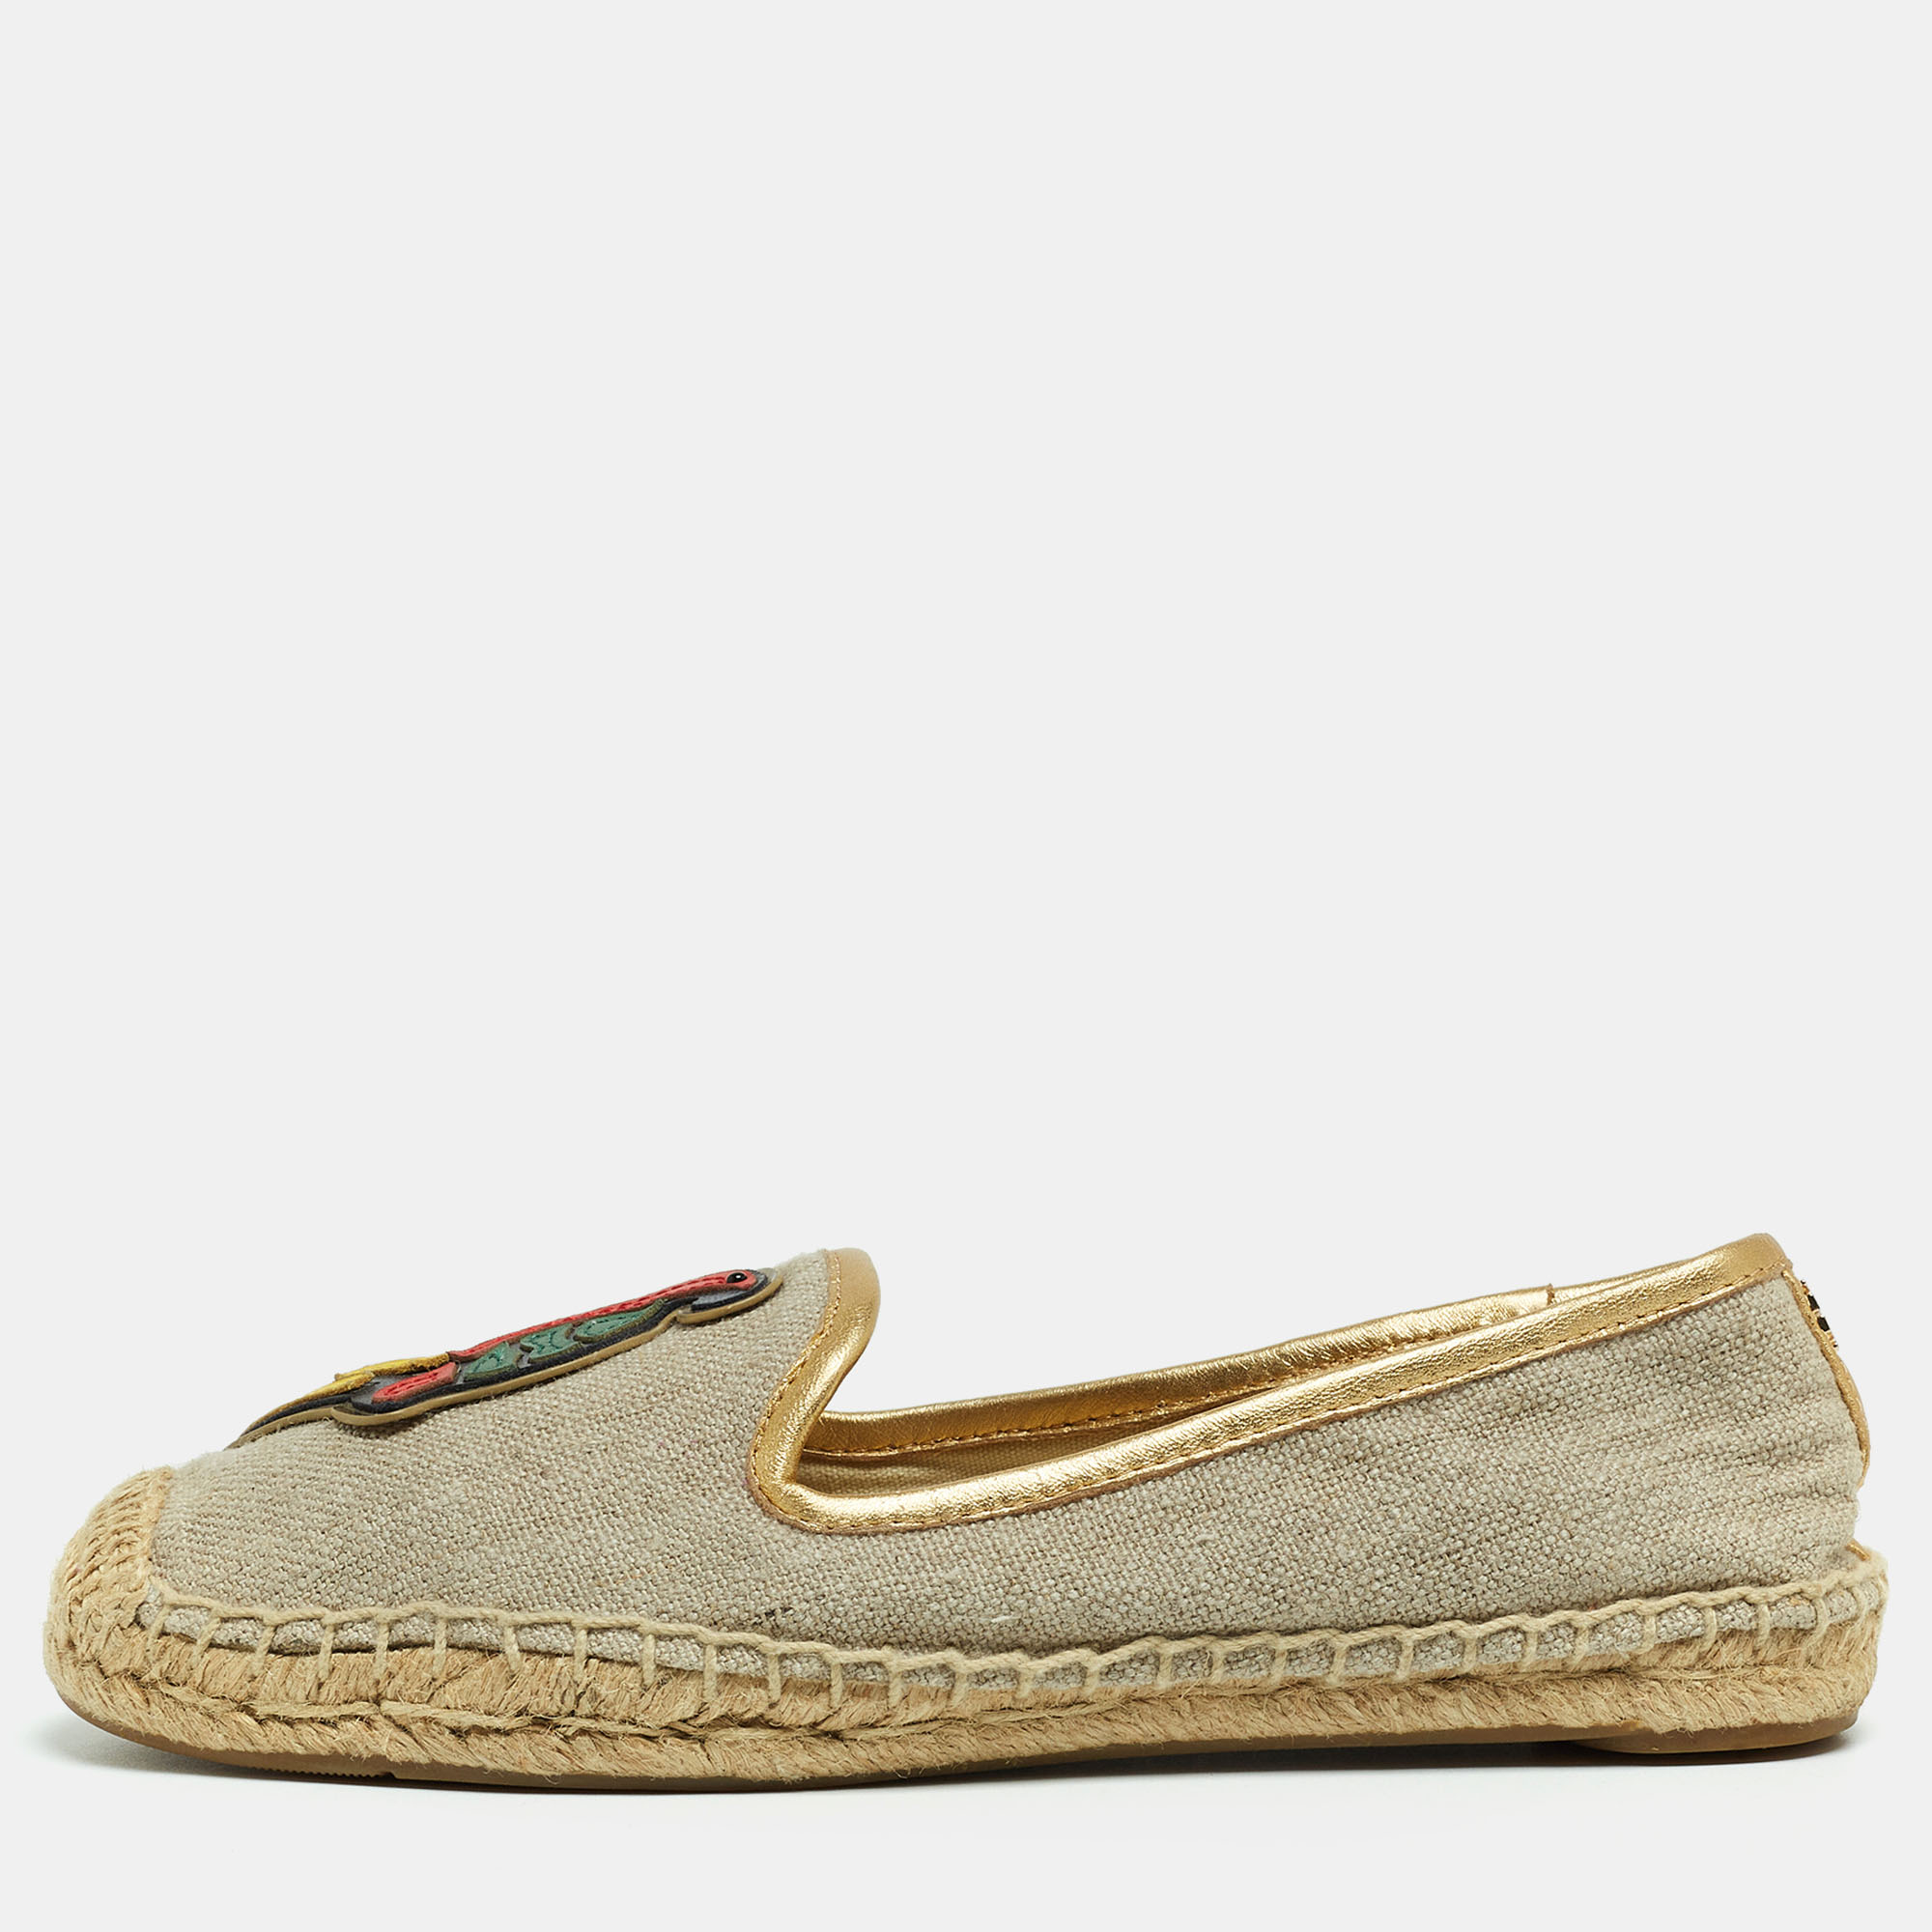 These espadrille flats are a must have in your footwear collection. They have multicolored appliques on the vamps and uber comfortable rubber soles. The house of Tory Burch brings you these impressive flats that complement any outfit. The beige hue of these versatile flats goes amazingly well with a delicate dress